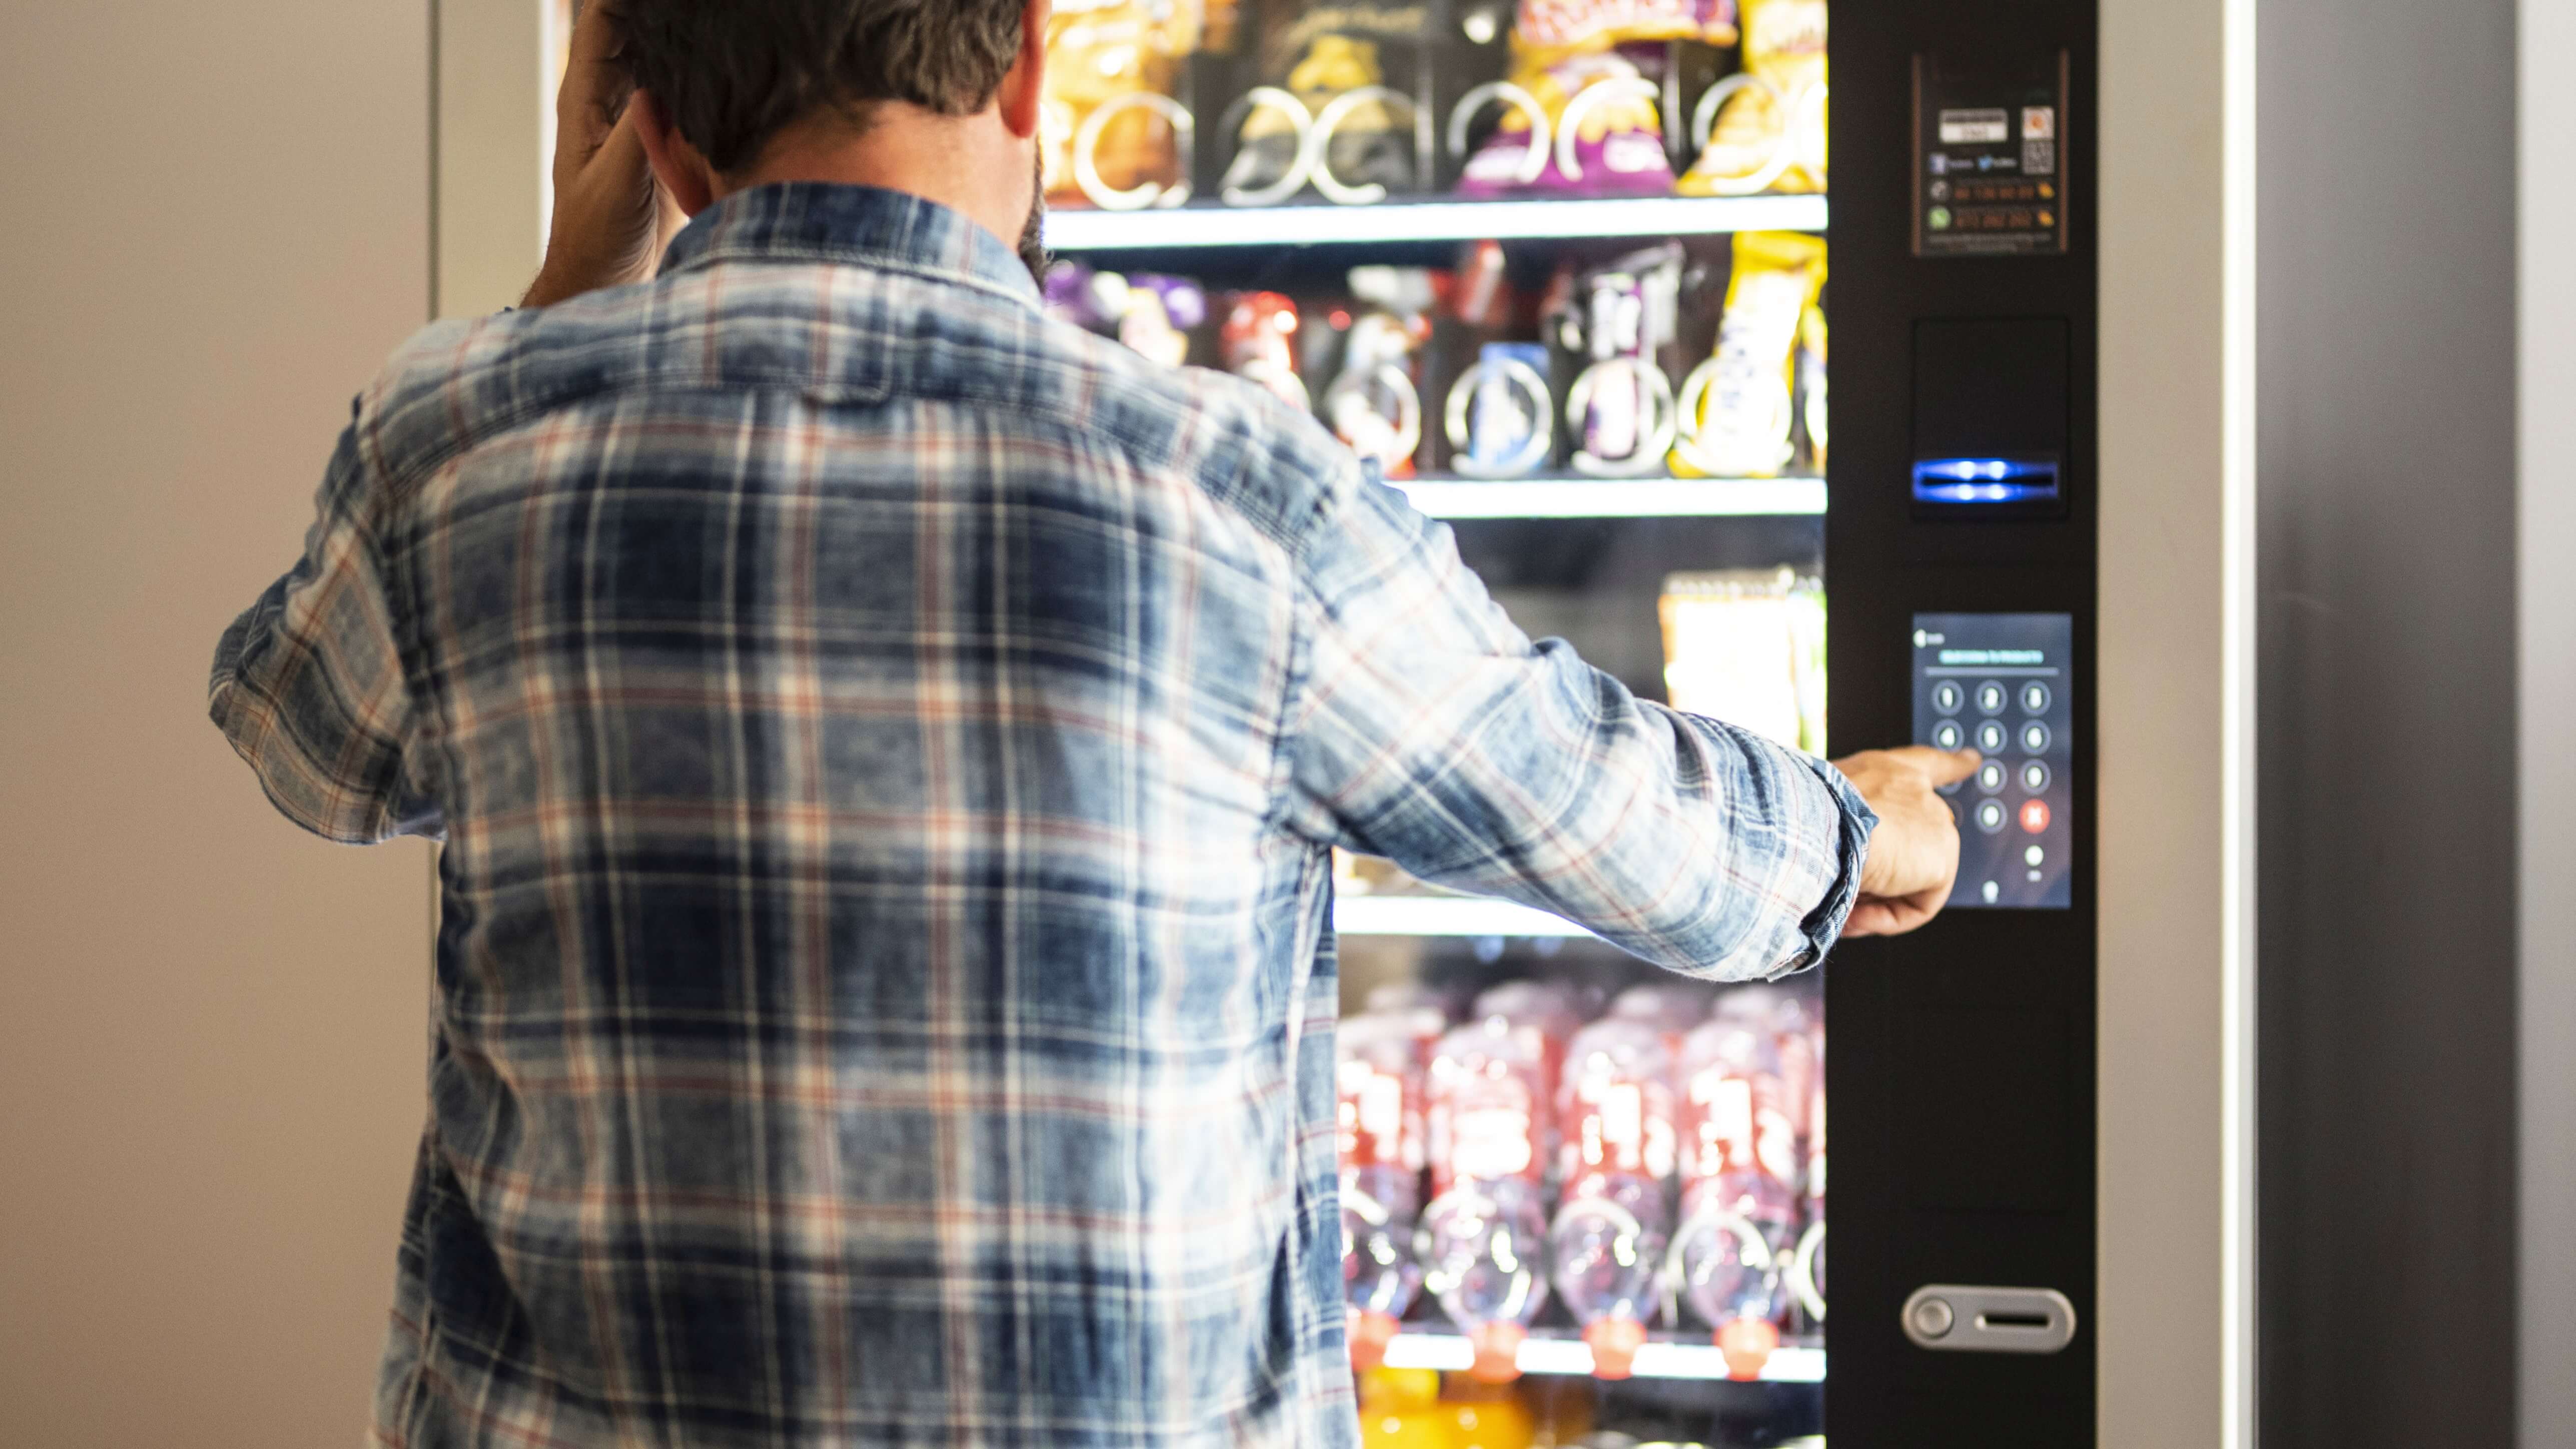 man in a plaid shirt operates a vending machine full of snacks